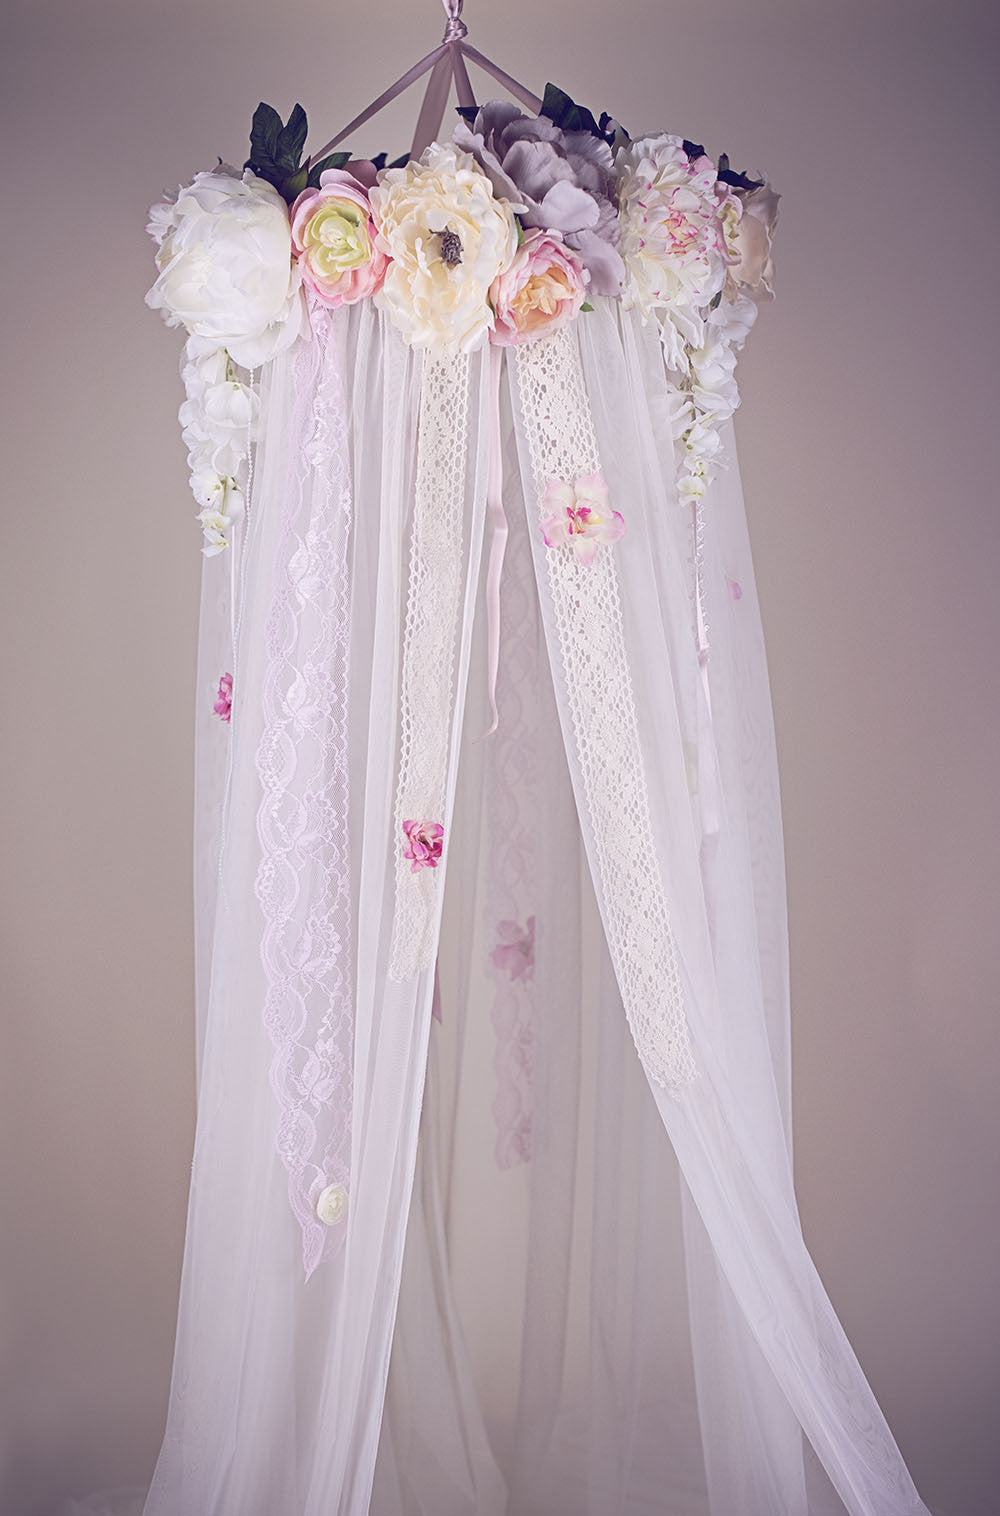 Dreamy Whimsical Floral Canopy Girls Room Decor - Honeydrops Designs